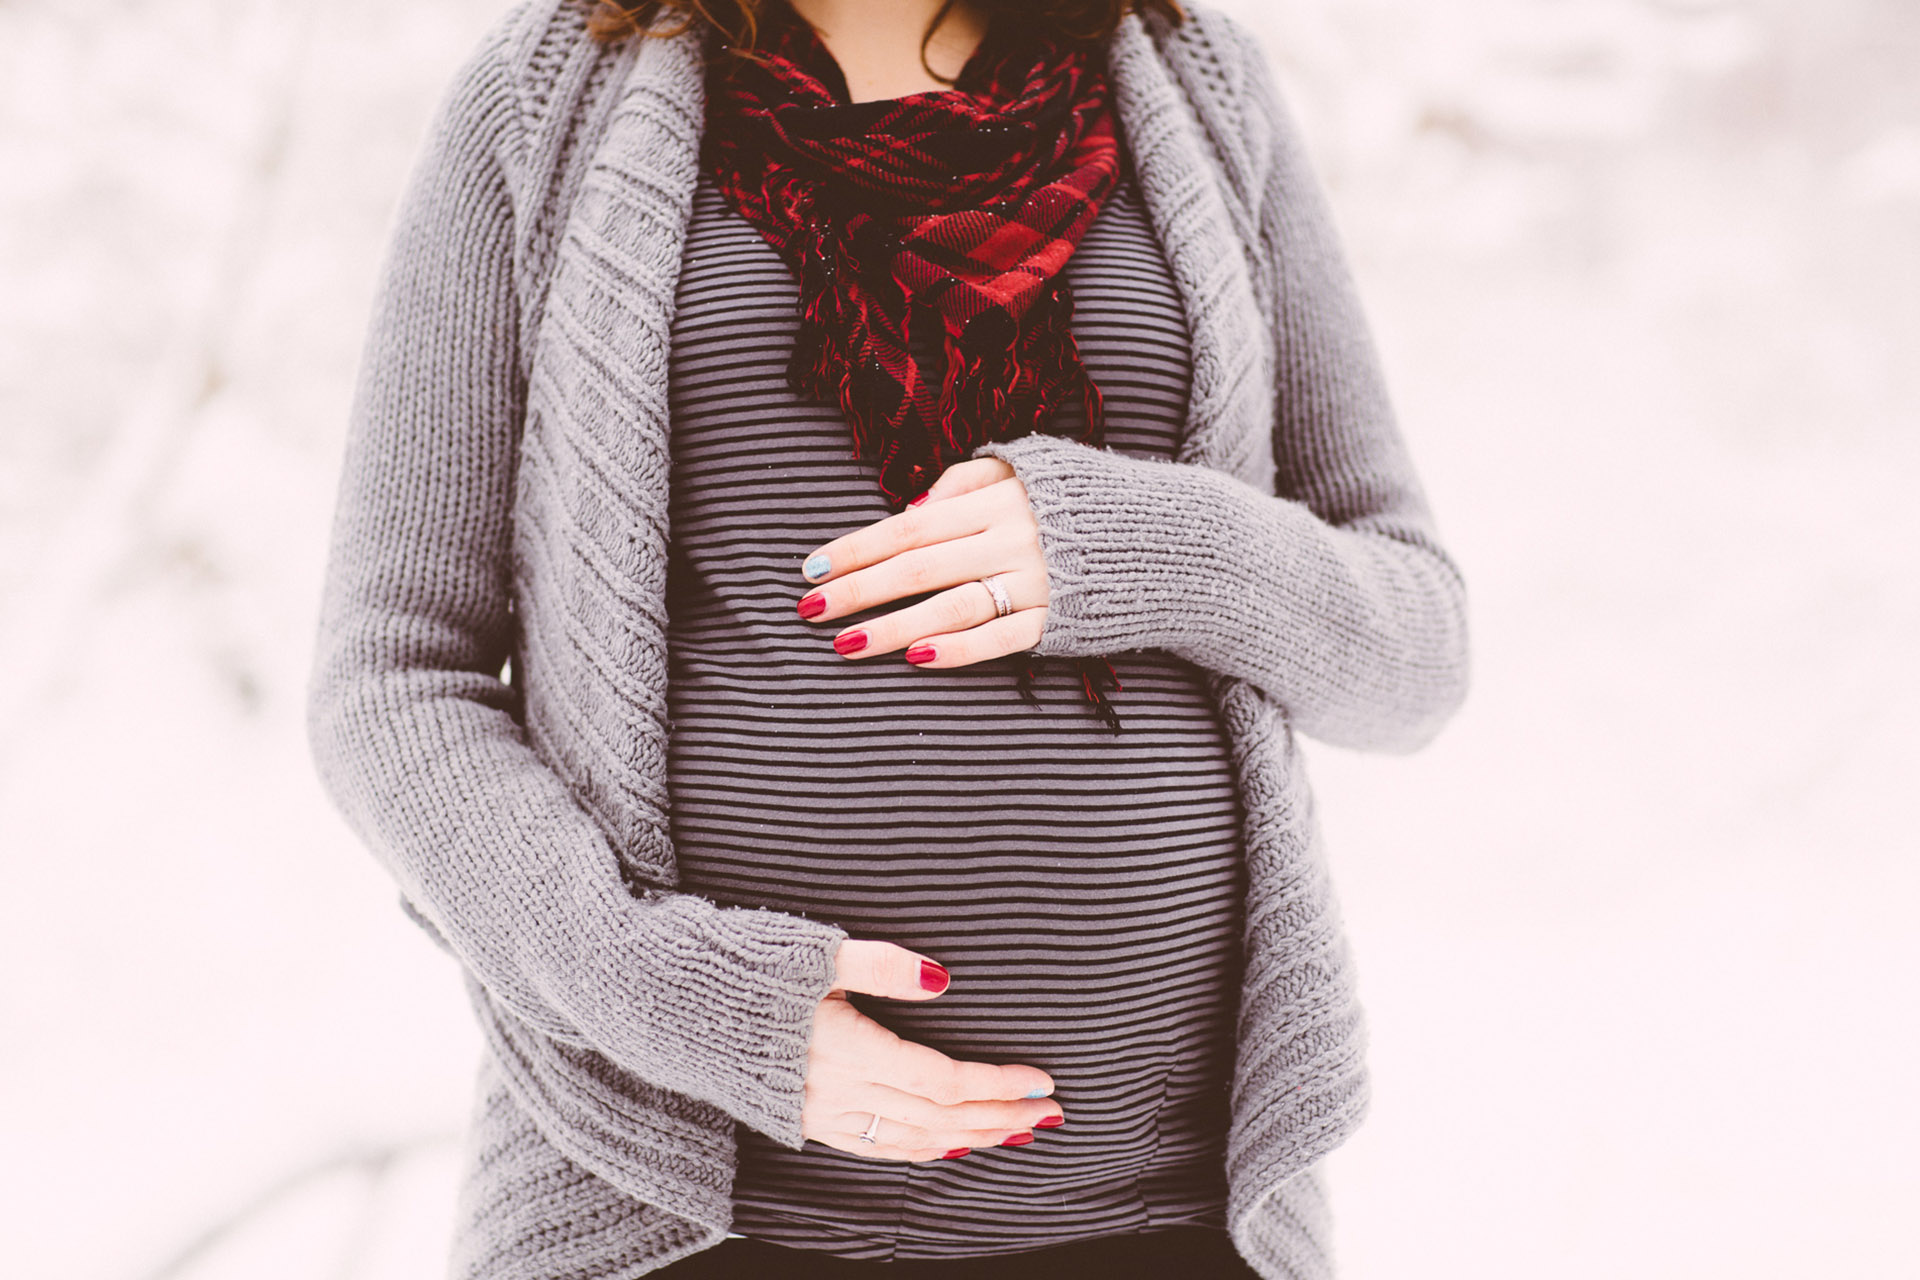 Angela Clunk Maternity Photos During Pregnancy - too much awesomeness photography - image 43.jpg